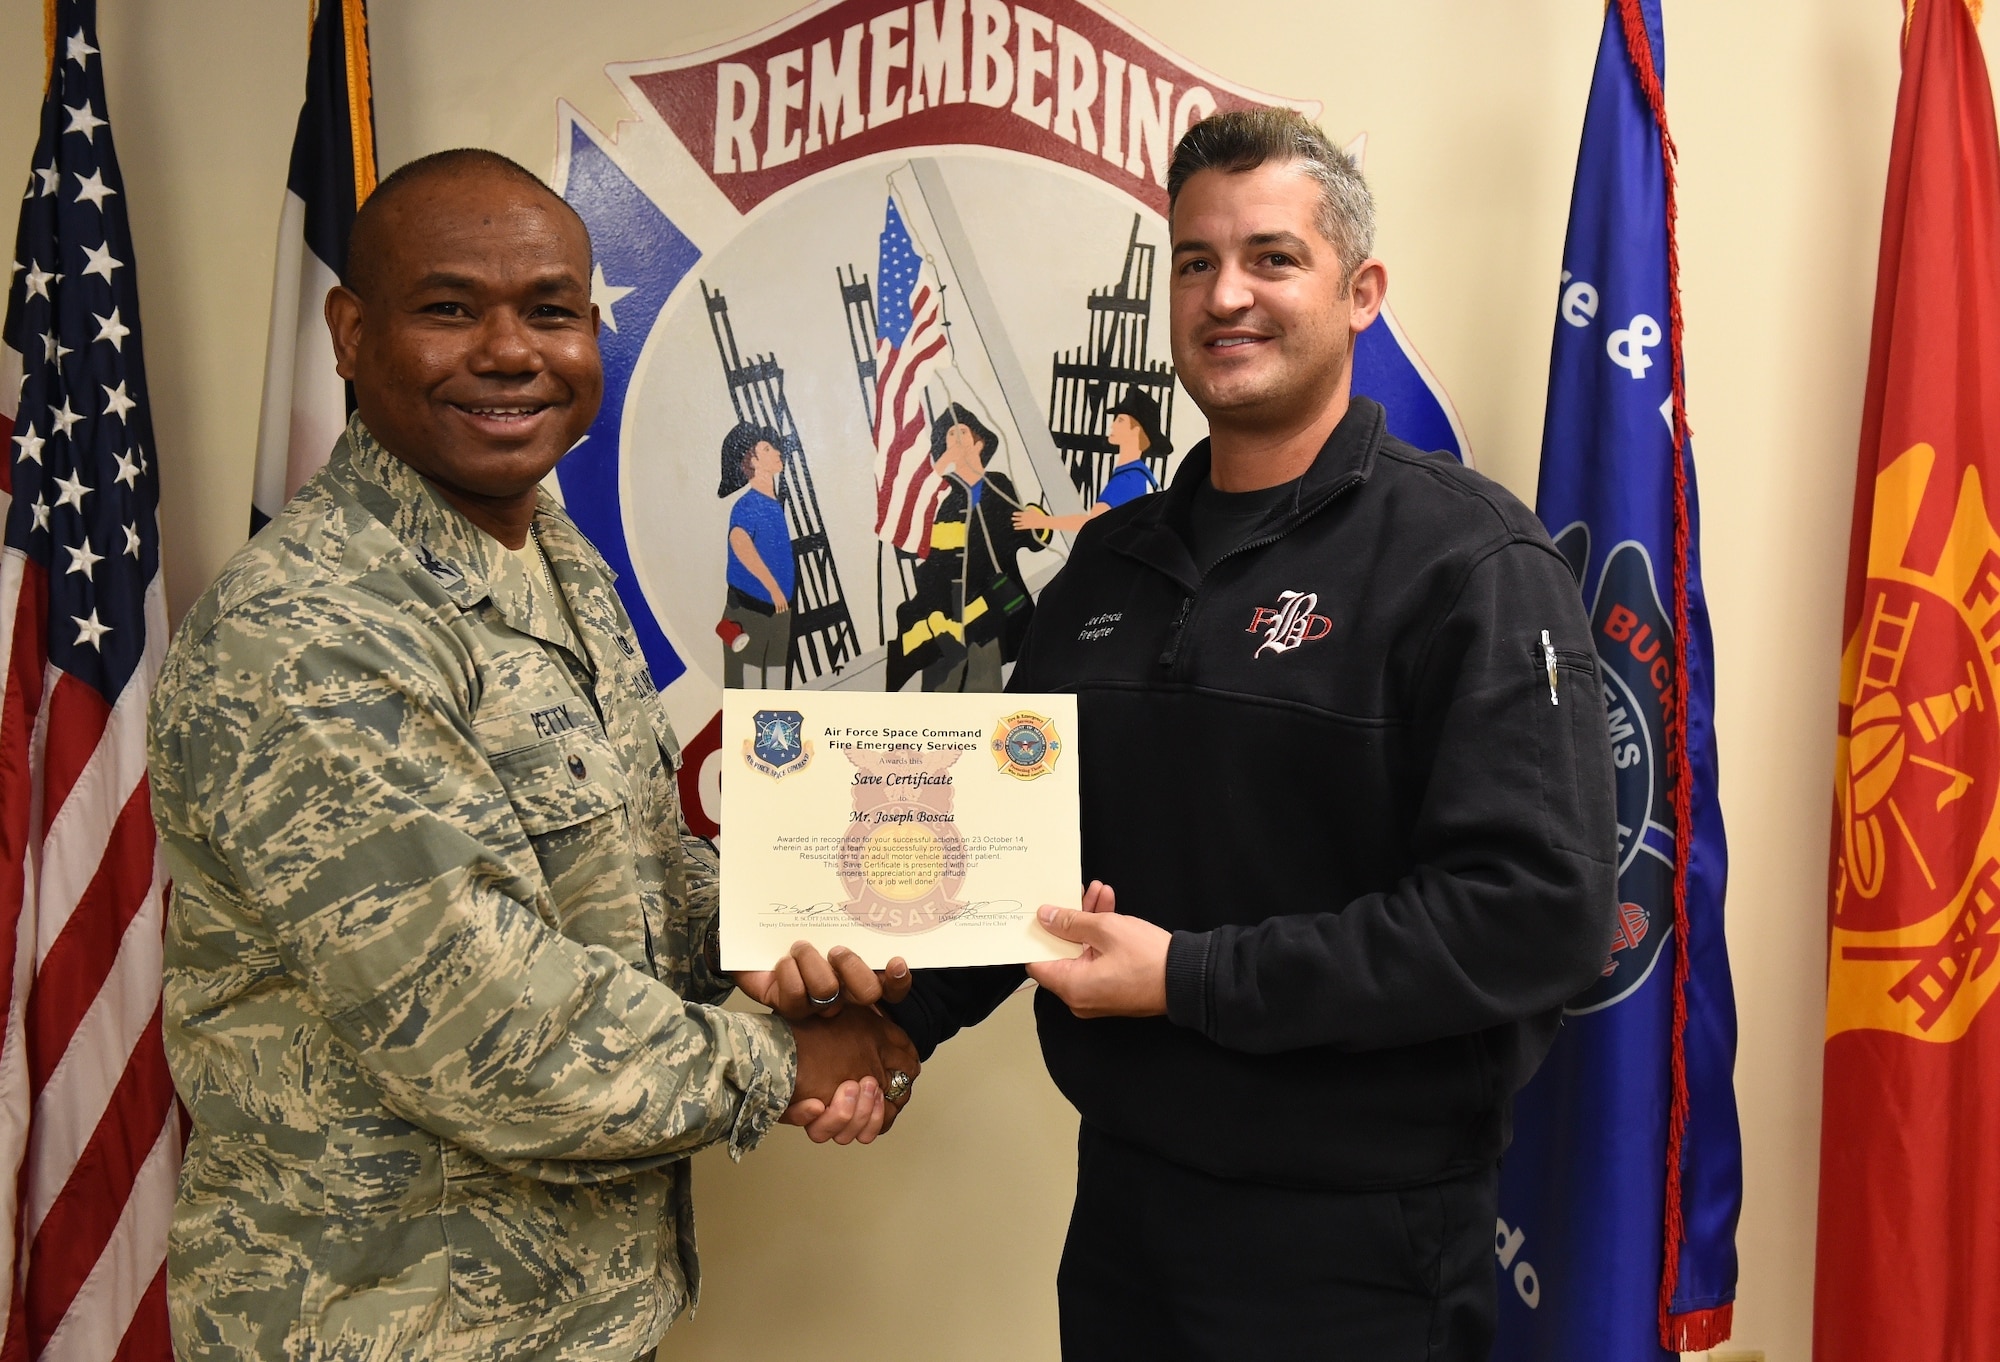 Joseph Boscia, Buckley Fire Emergency Services, receives an Air Force Space Command Fire Emergency Services Save Certificate from Col. George Petty, AFSPC Civil Engineer Readiness and Emergency Management chief, Nov. 20, 2014, at the fire department on Buckley Air Force Base, Colo. Boscia and three other firefighters were awarded for their lifesaving actions while responding to a major vehicle accident in October 2014. (U.S. Air Force photo by Tech. Sgt. Kali L. Gradishar/Released)